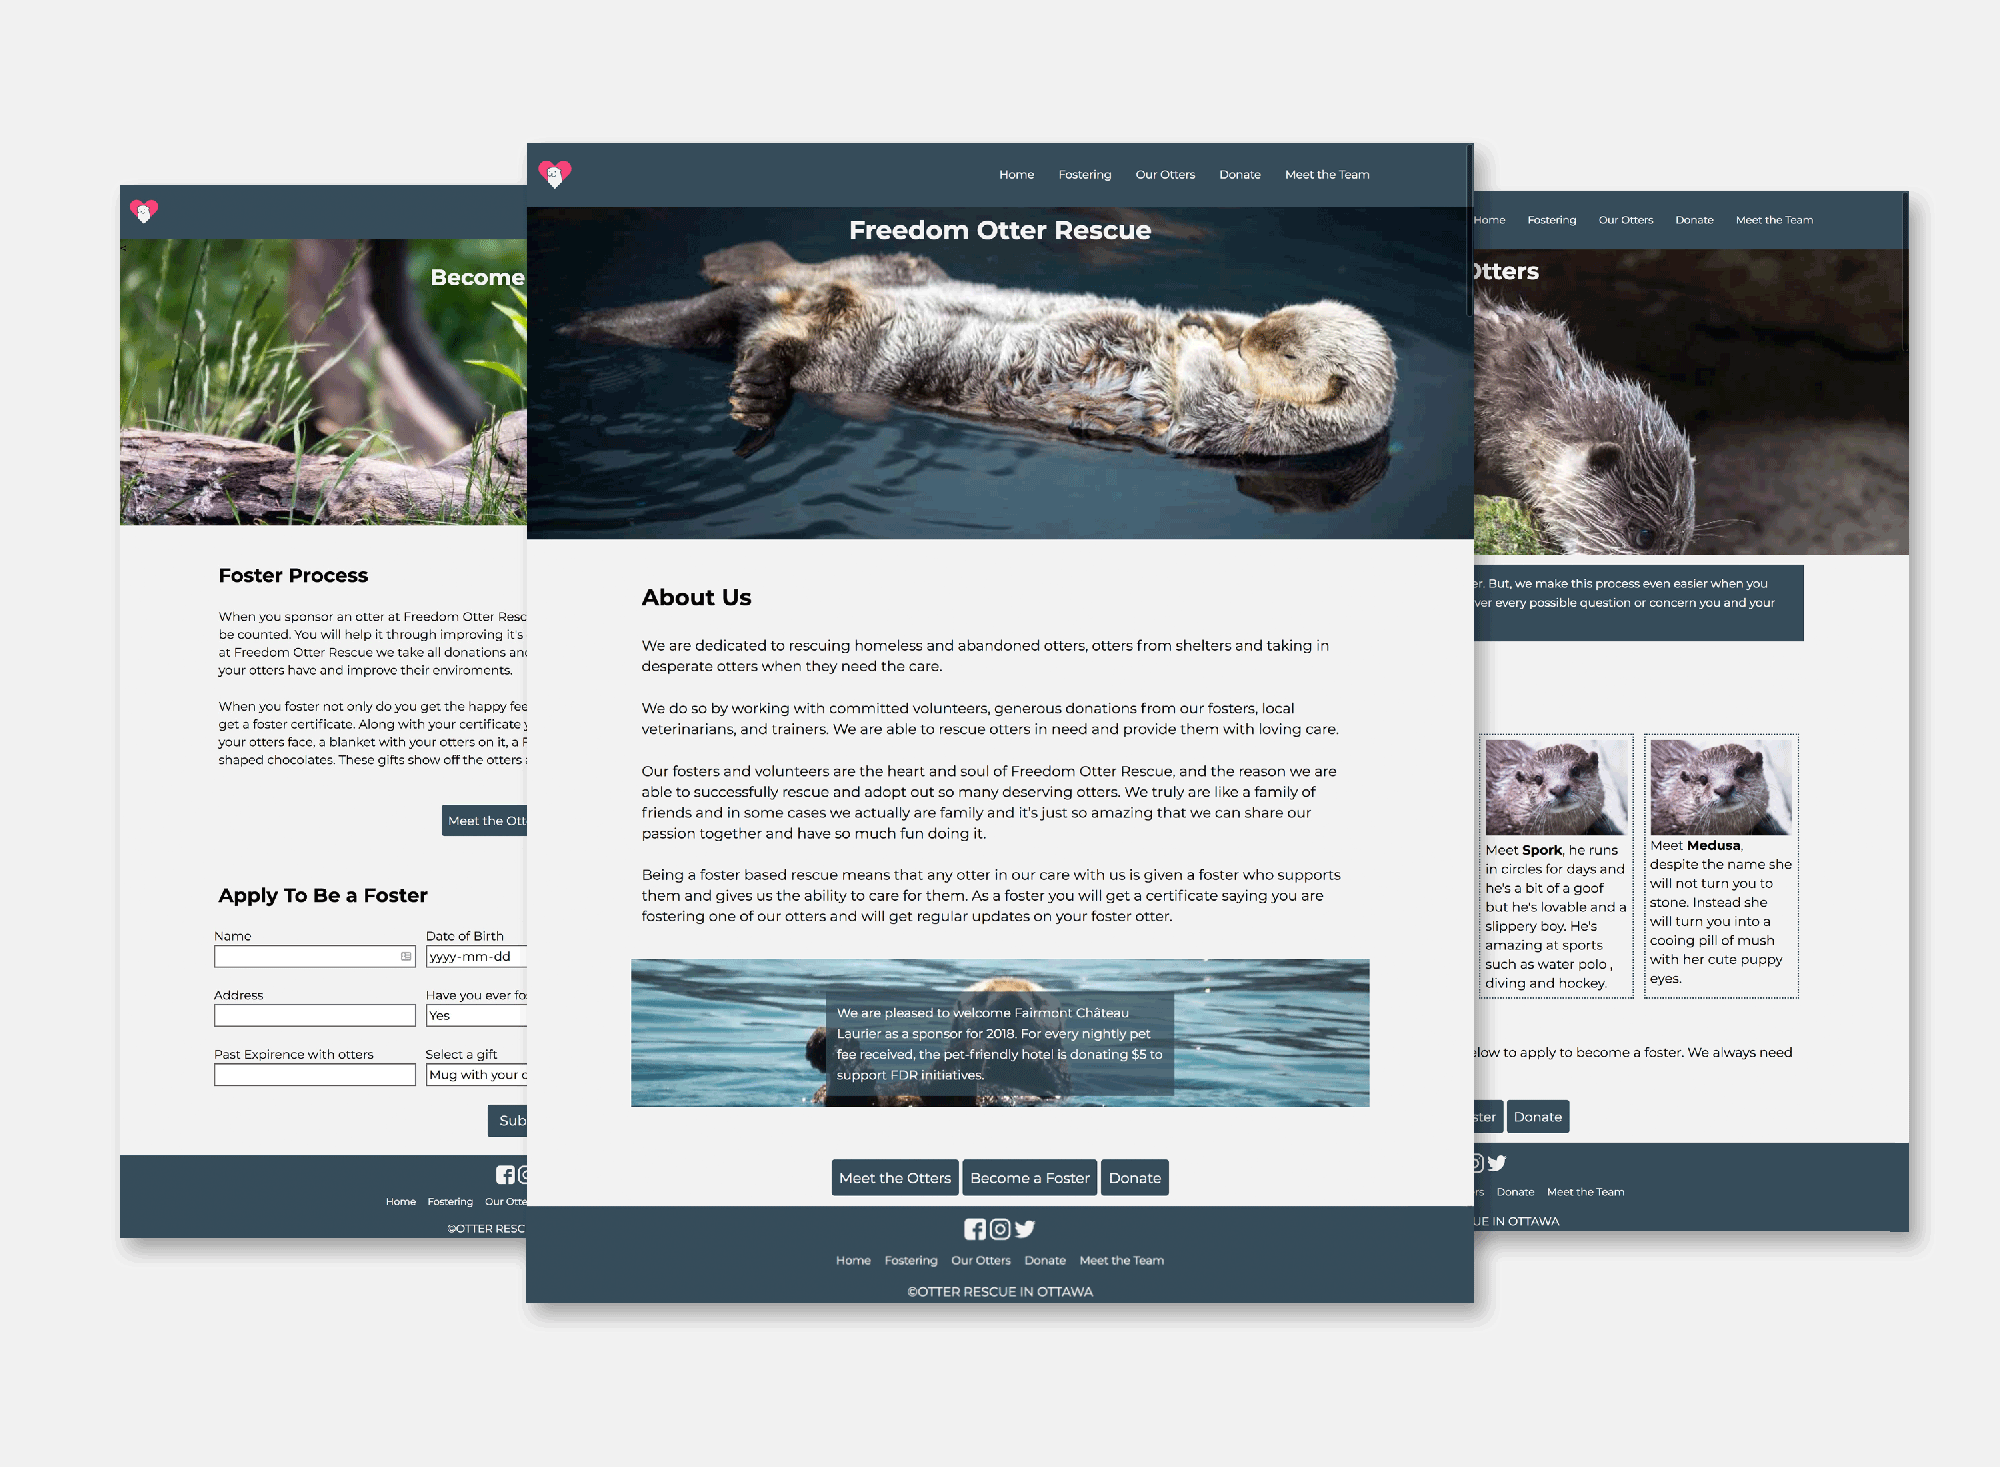 A display of the main 3 pages on the Freedom Otter Rescue site